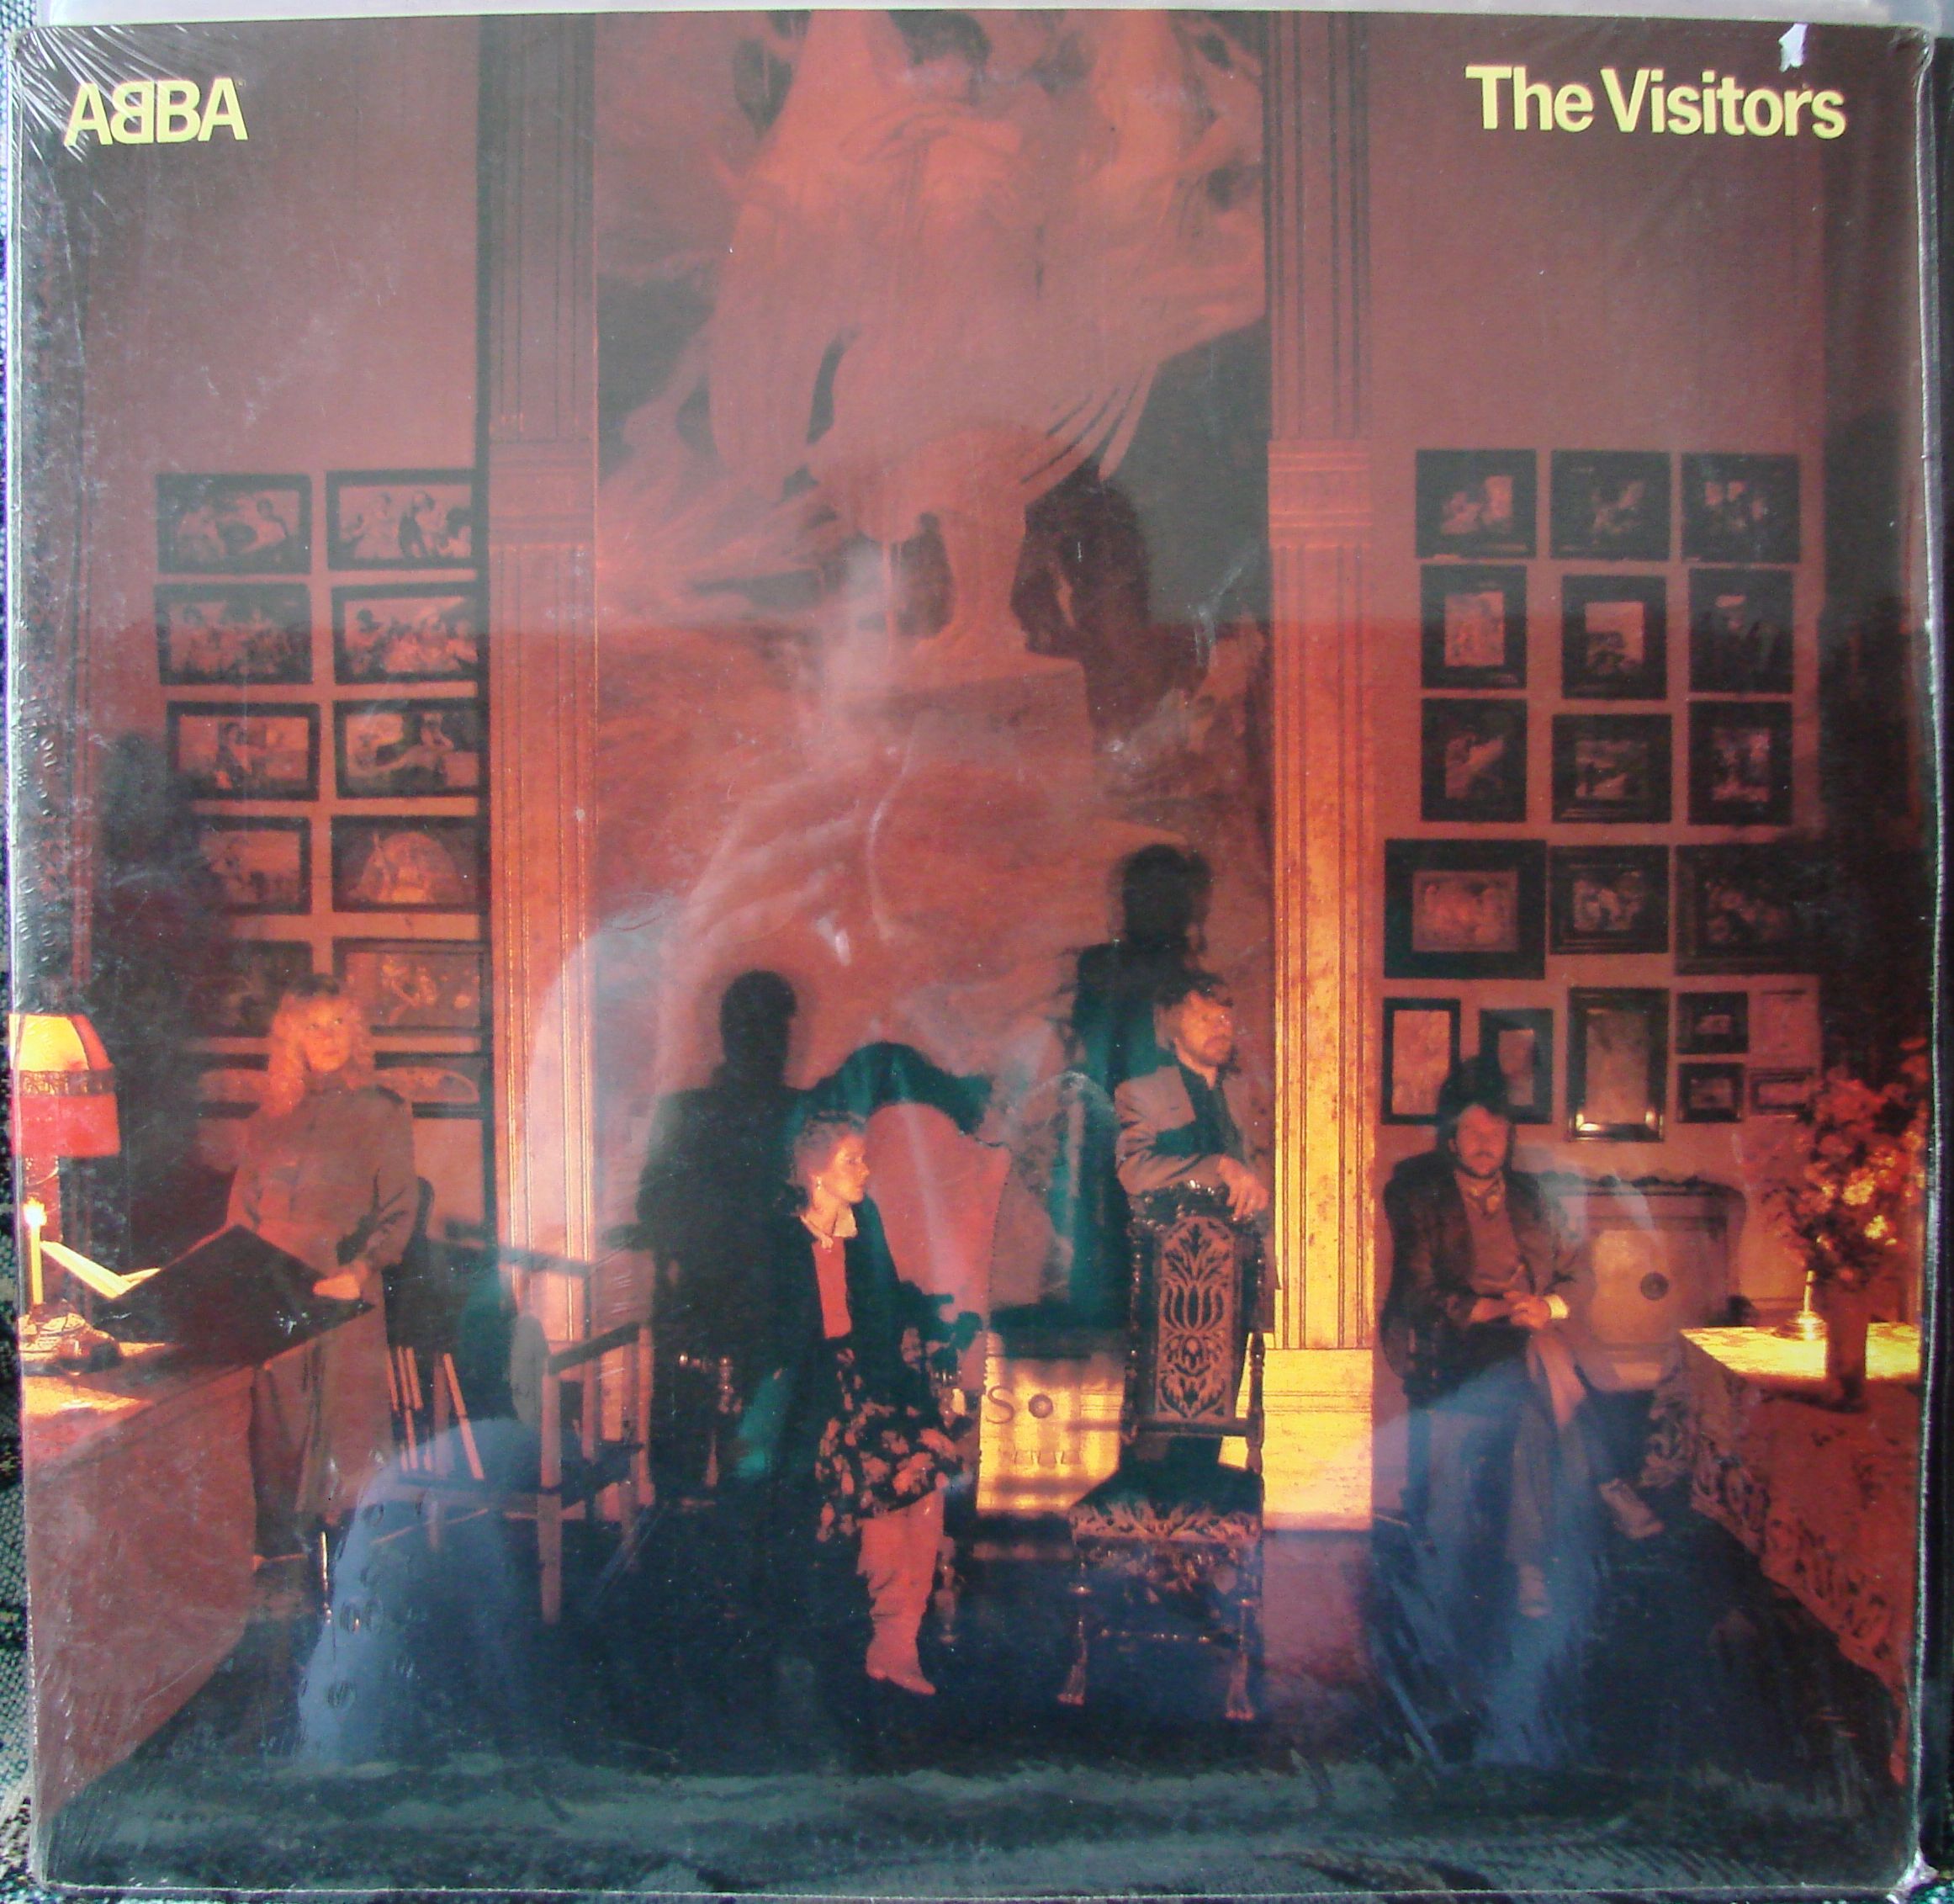 ABBA - The Visitors - 1981 - Front.jpg